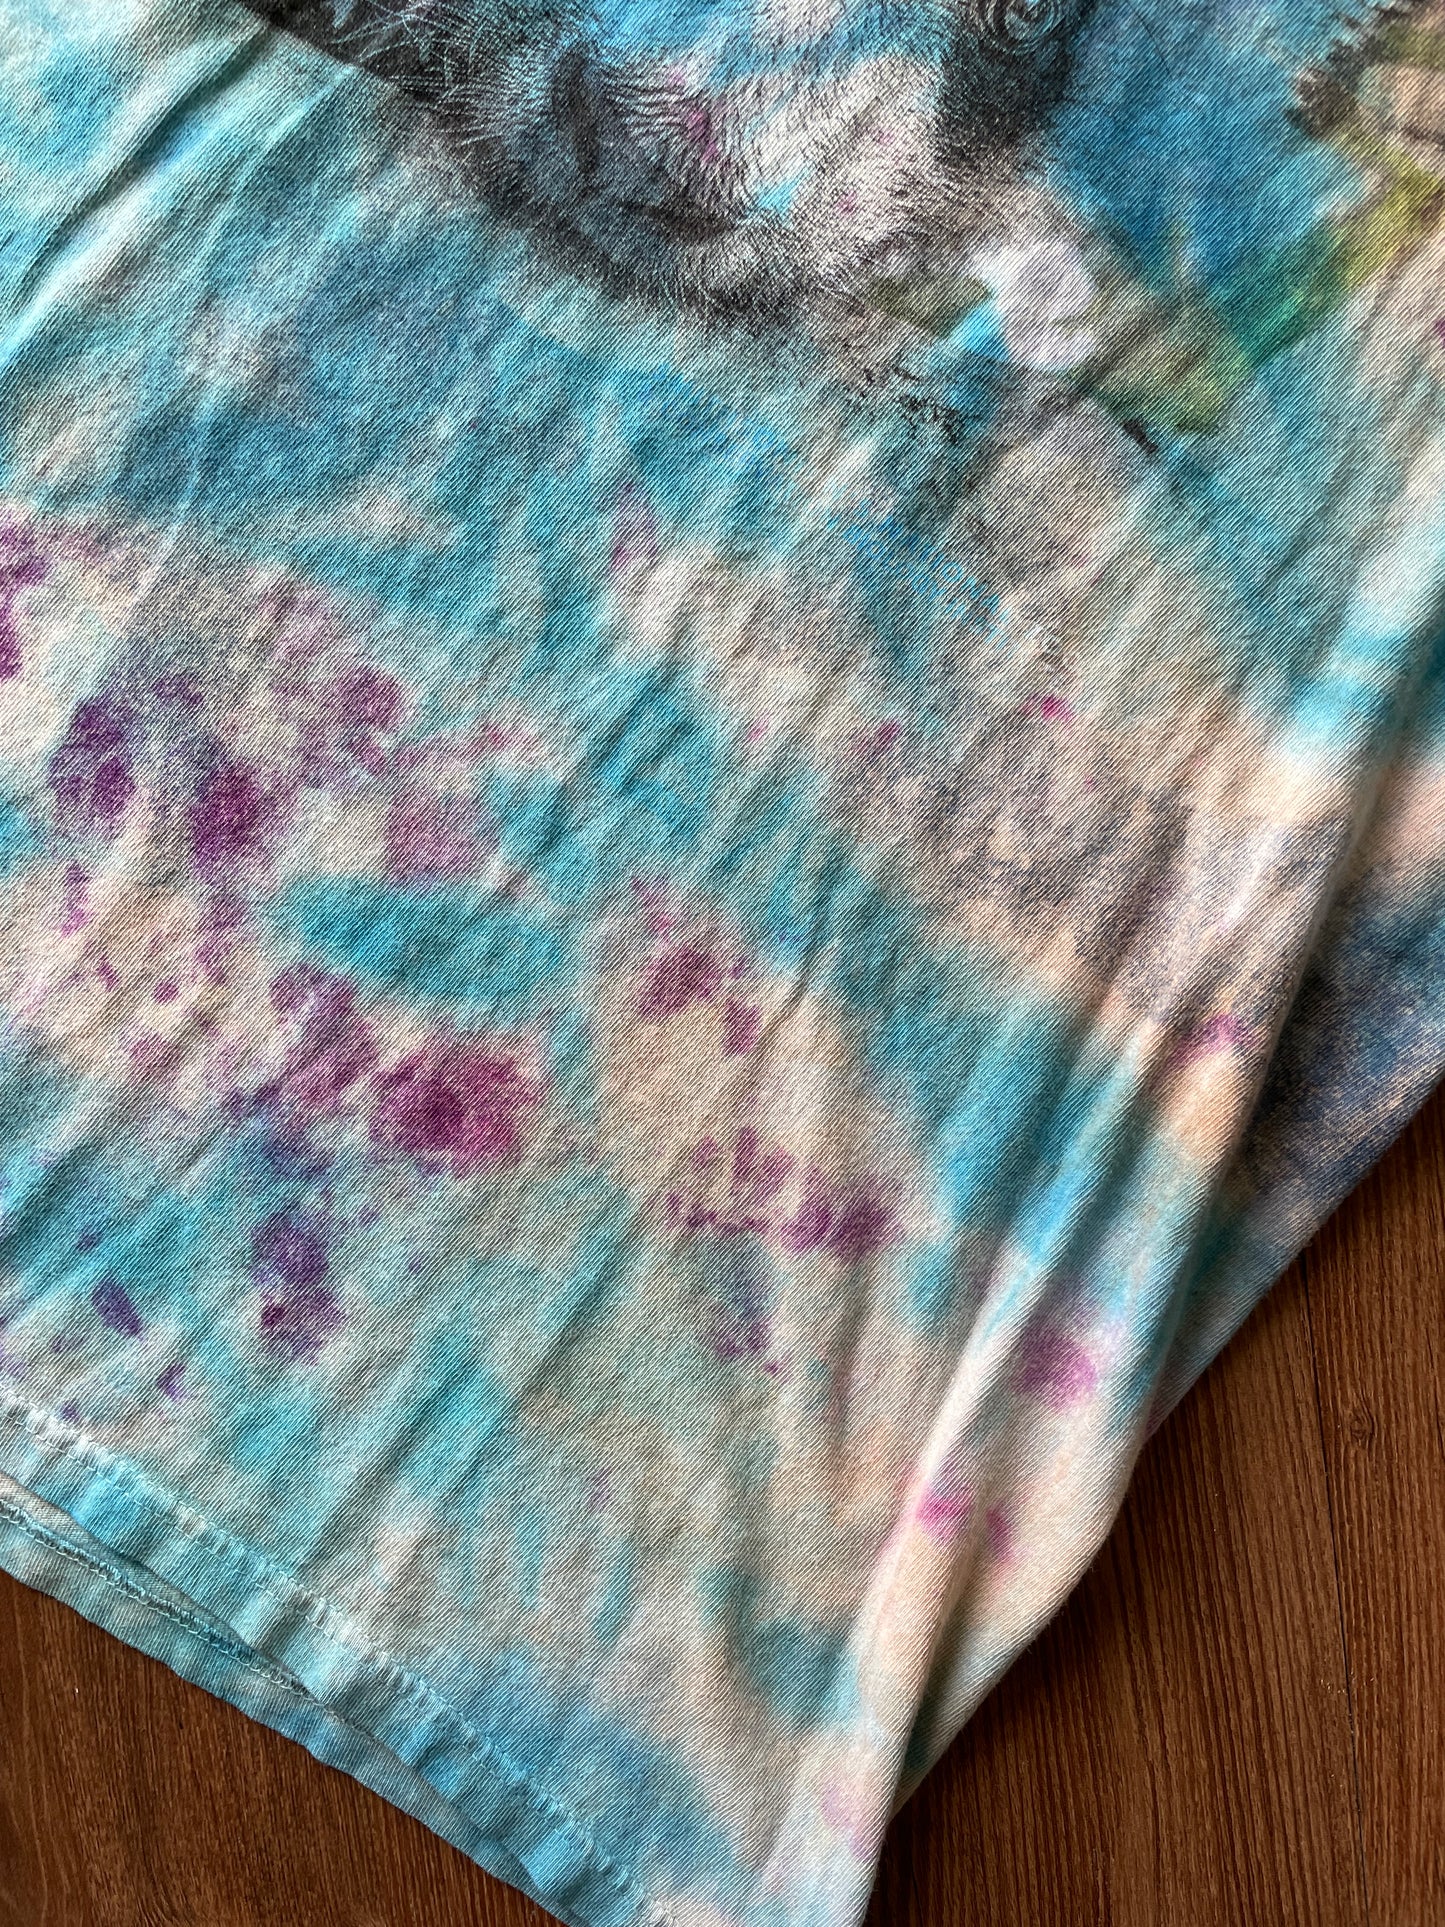 LARGE Men’s Giant Panda Galaxy Handmade Tie Dye T-Shirt | One-Of-a-Kind Pastel Blue and Purple Short Sleeve